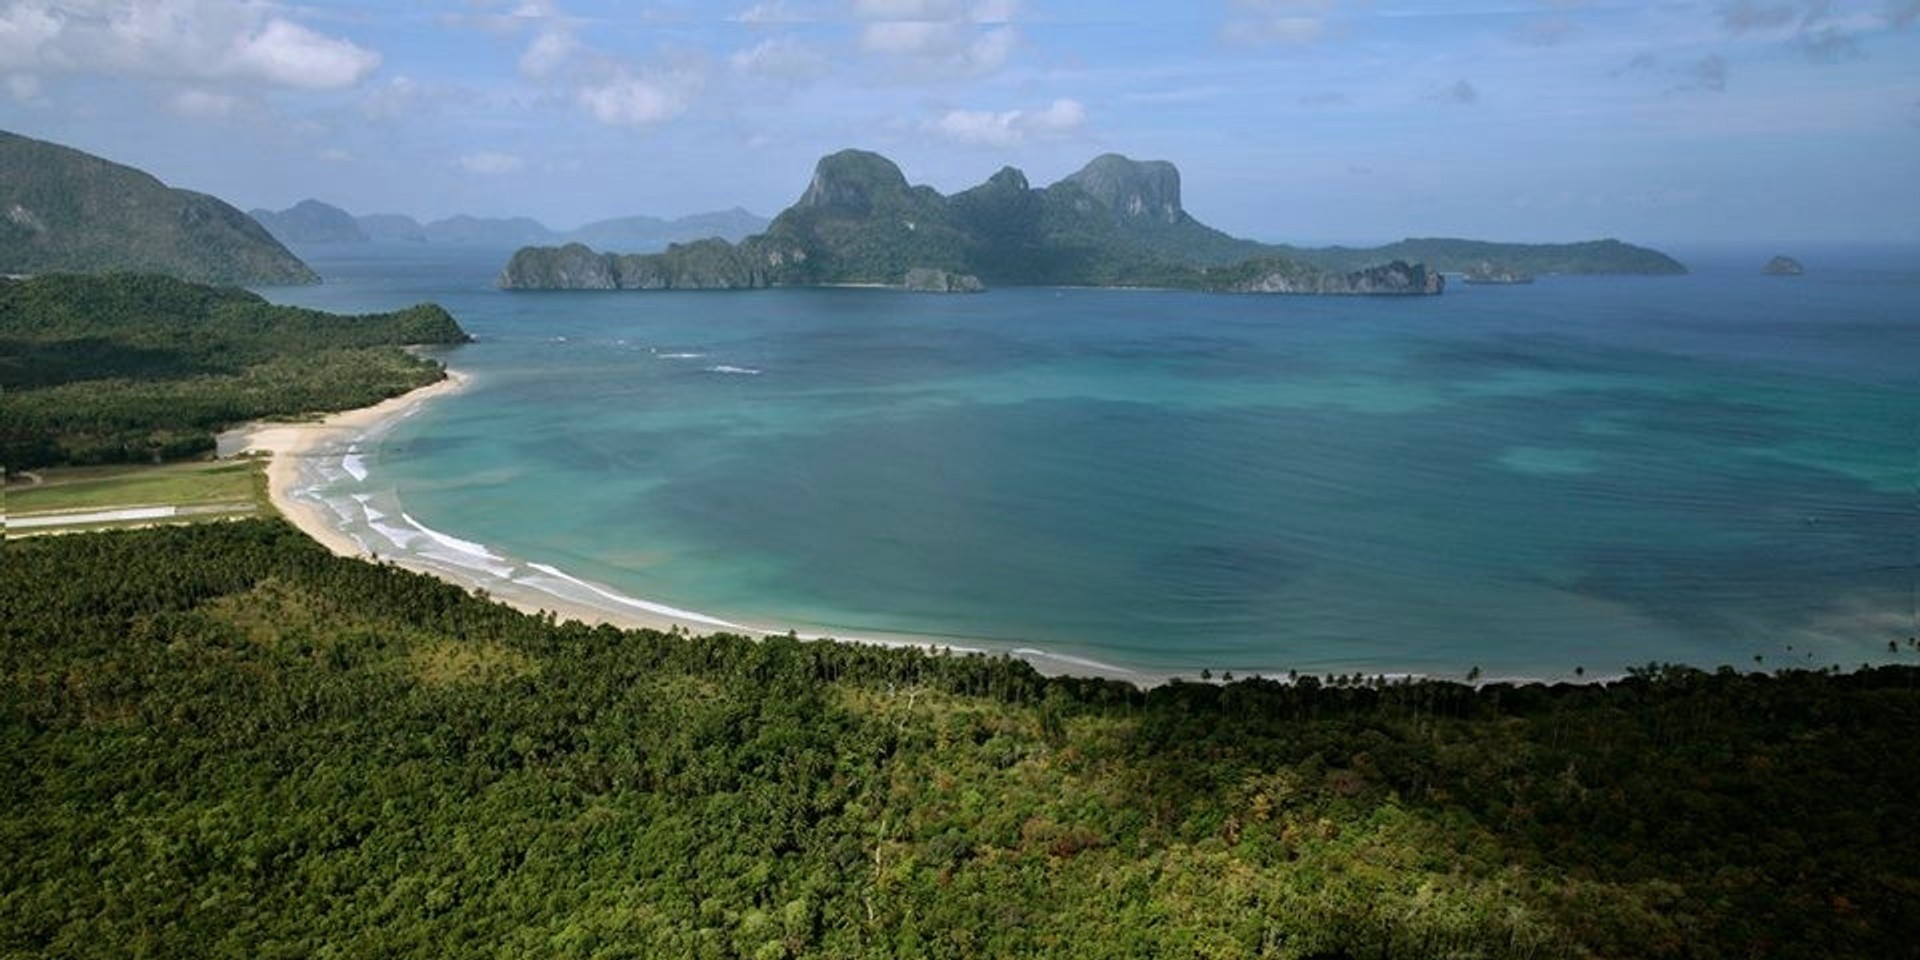 El Nido is set to be your next music festival destination with Lio Beach Festival